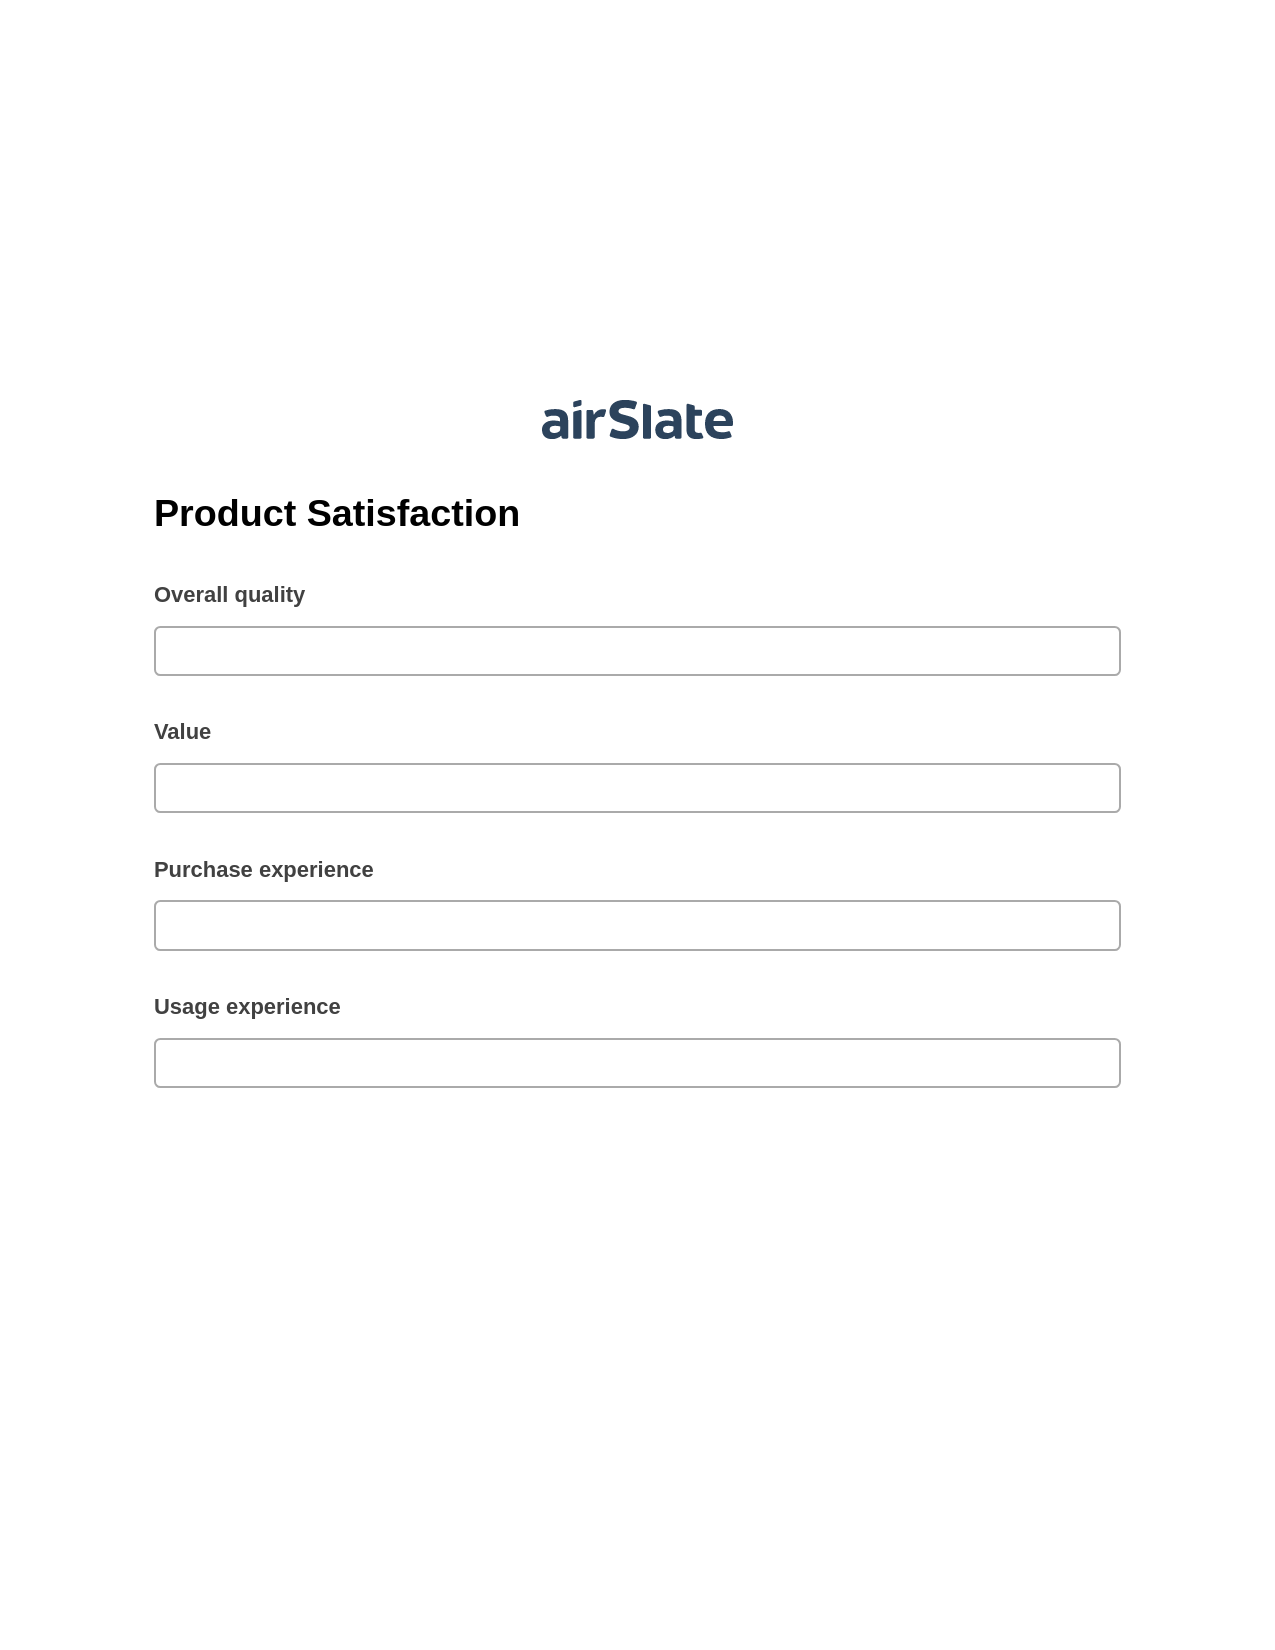 Multirole Product Satisfaction Pre-fill Dropdowns from CSV File Bot, Lock the slate bot, Export to Excel 365 Bot